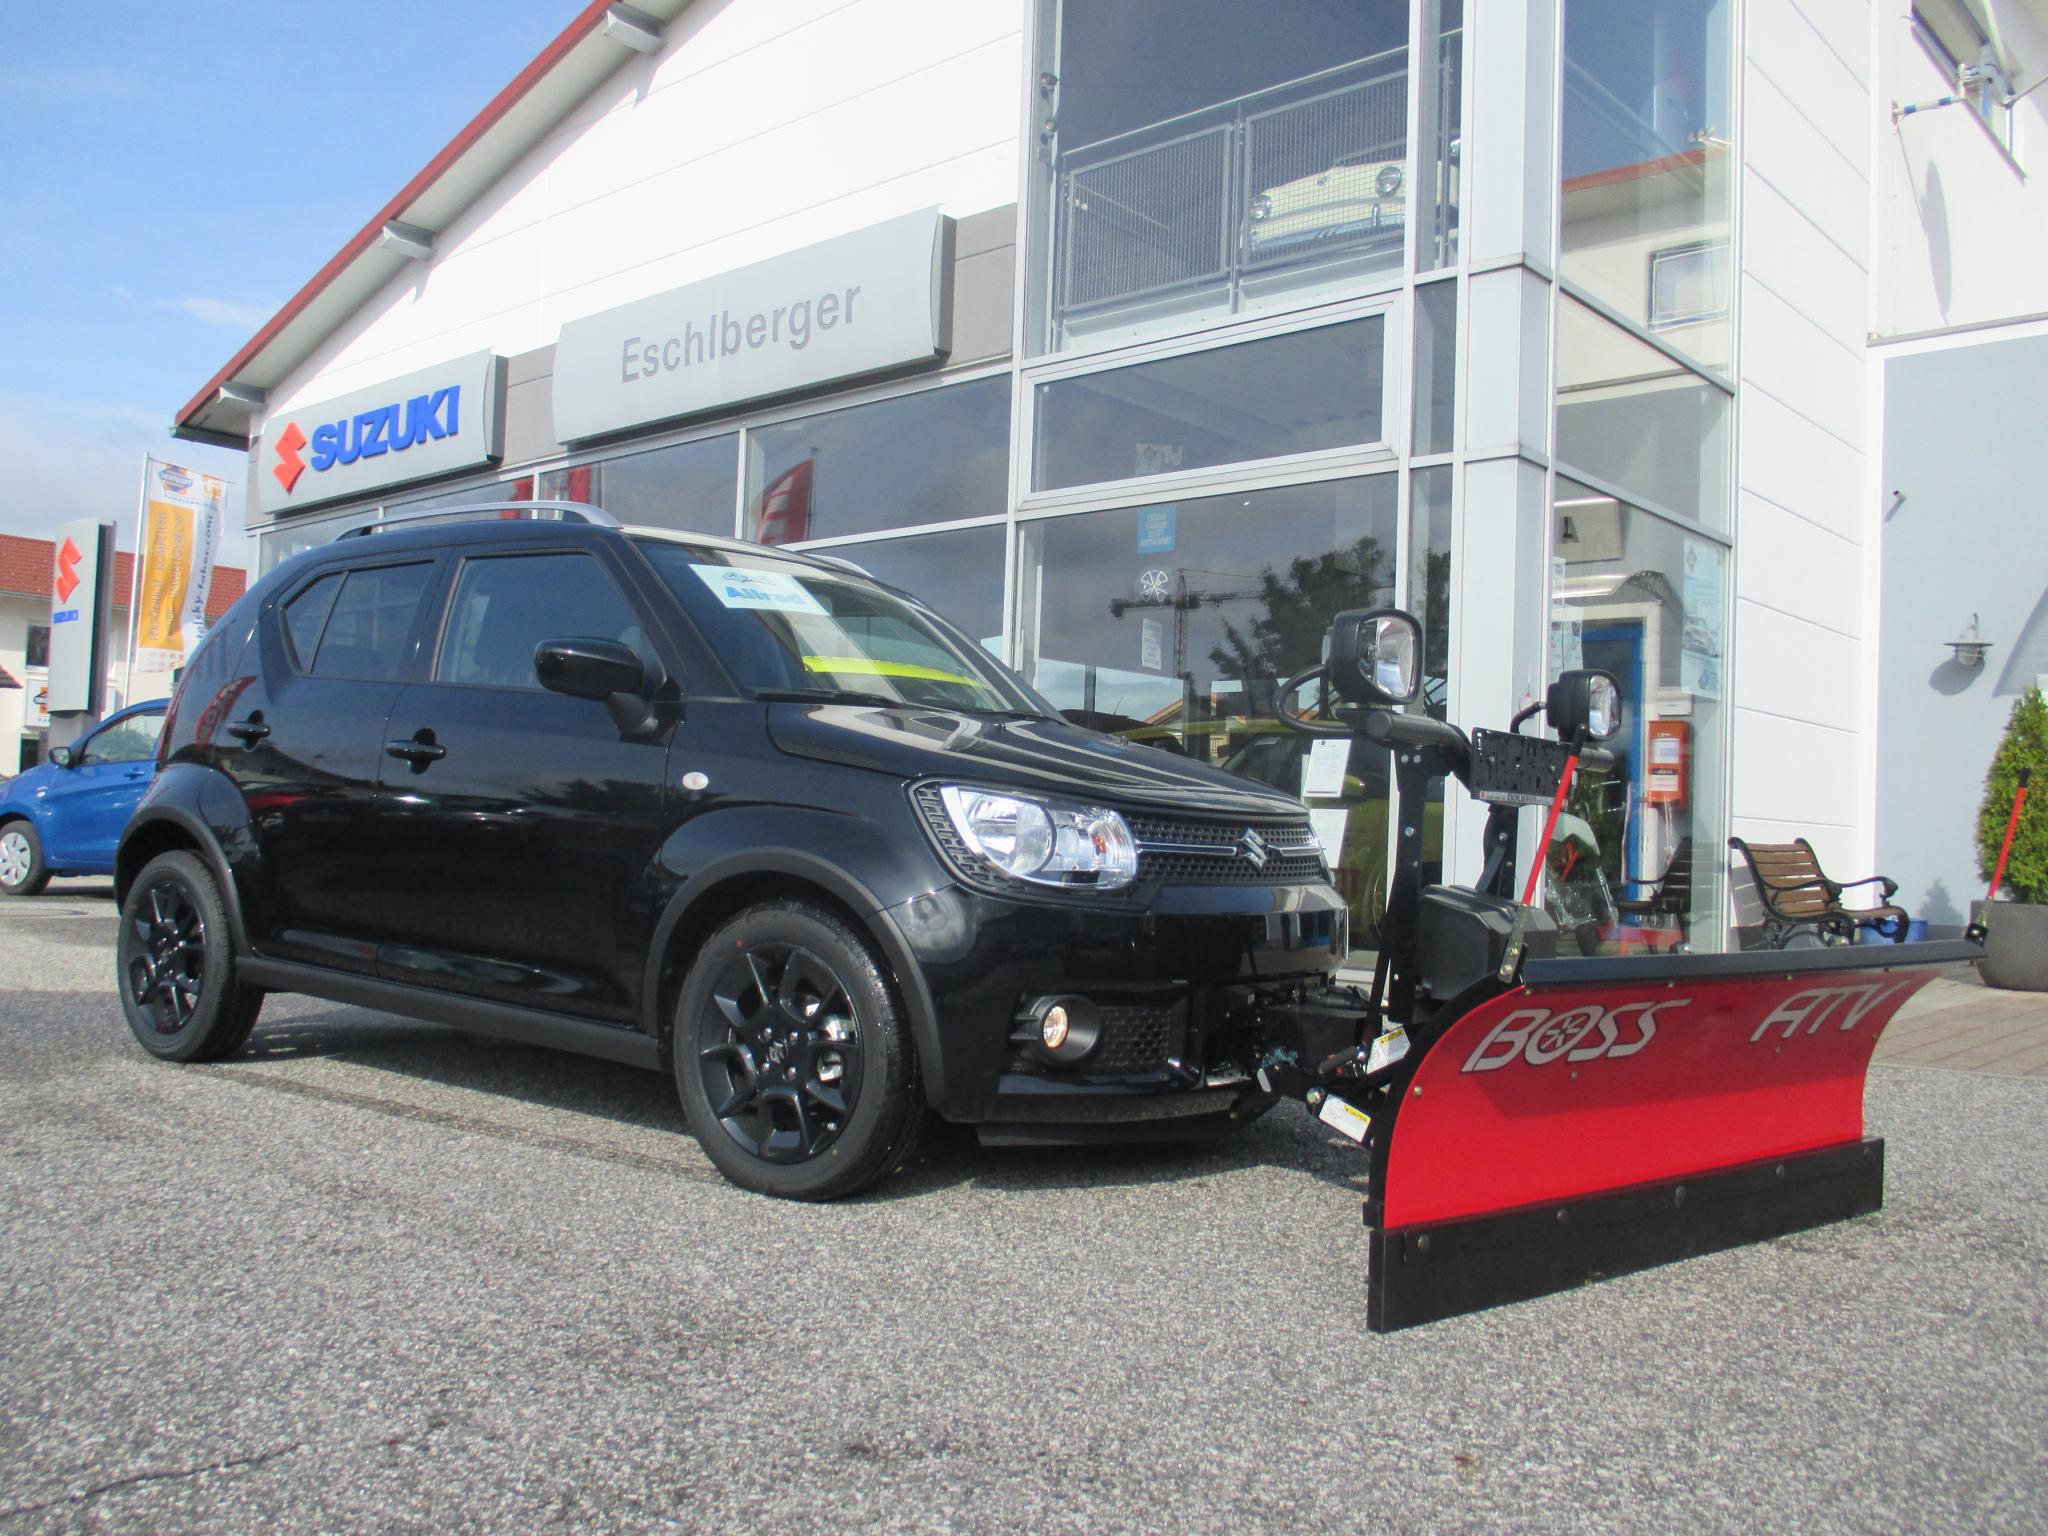 Snow plow for Ignis!